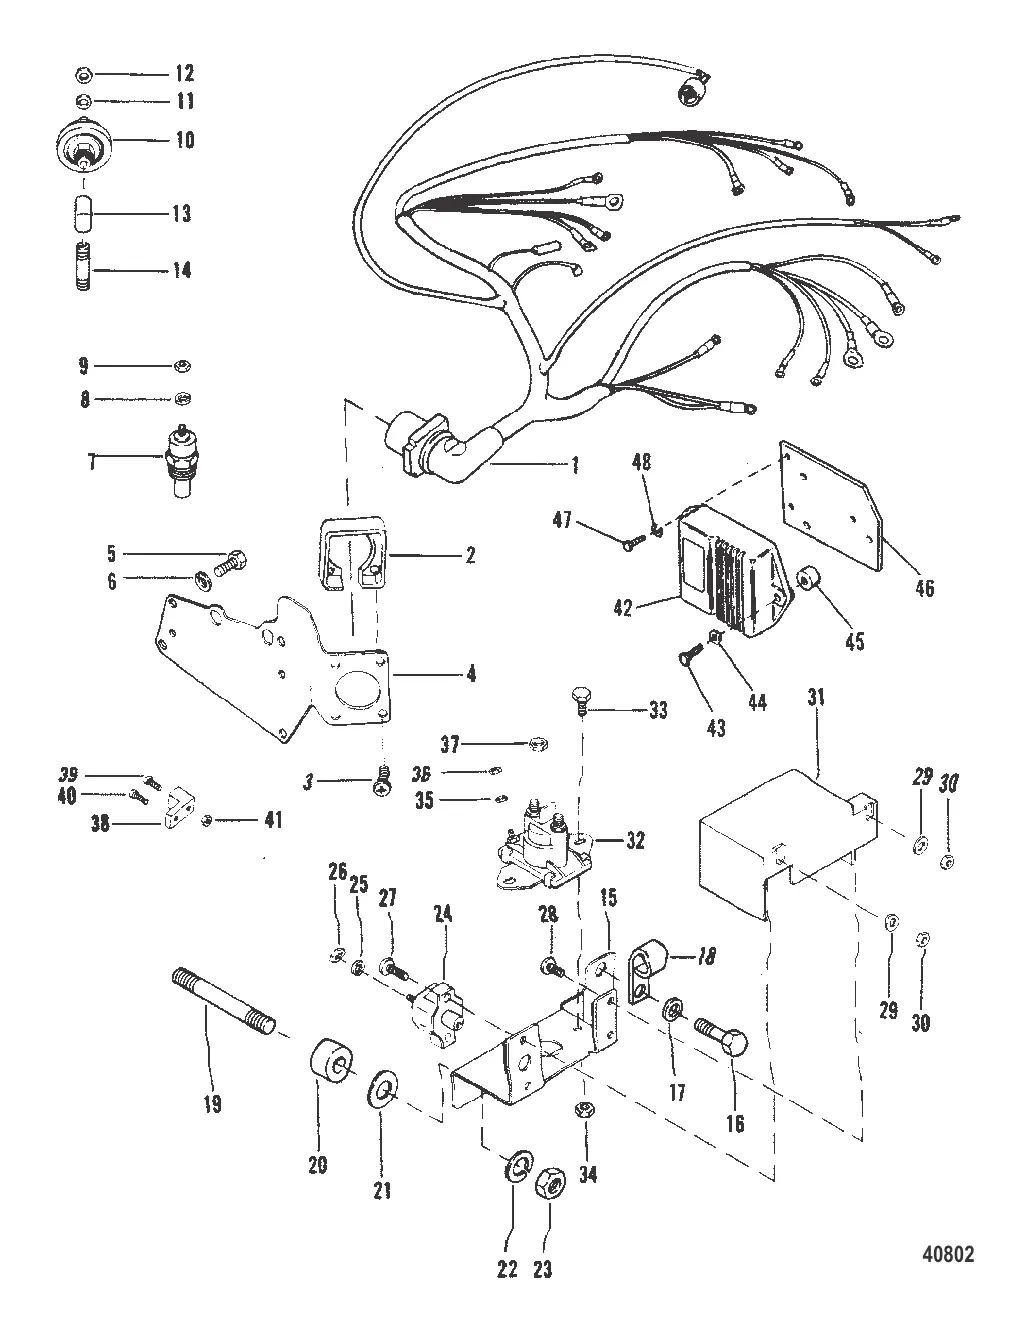 Wiring Harness & Electrical Components